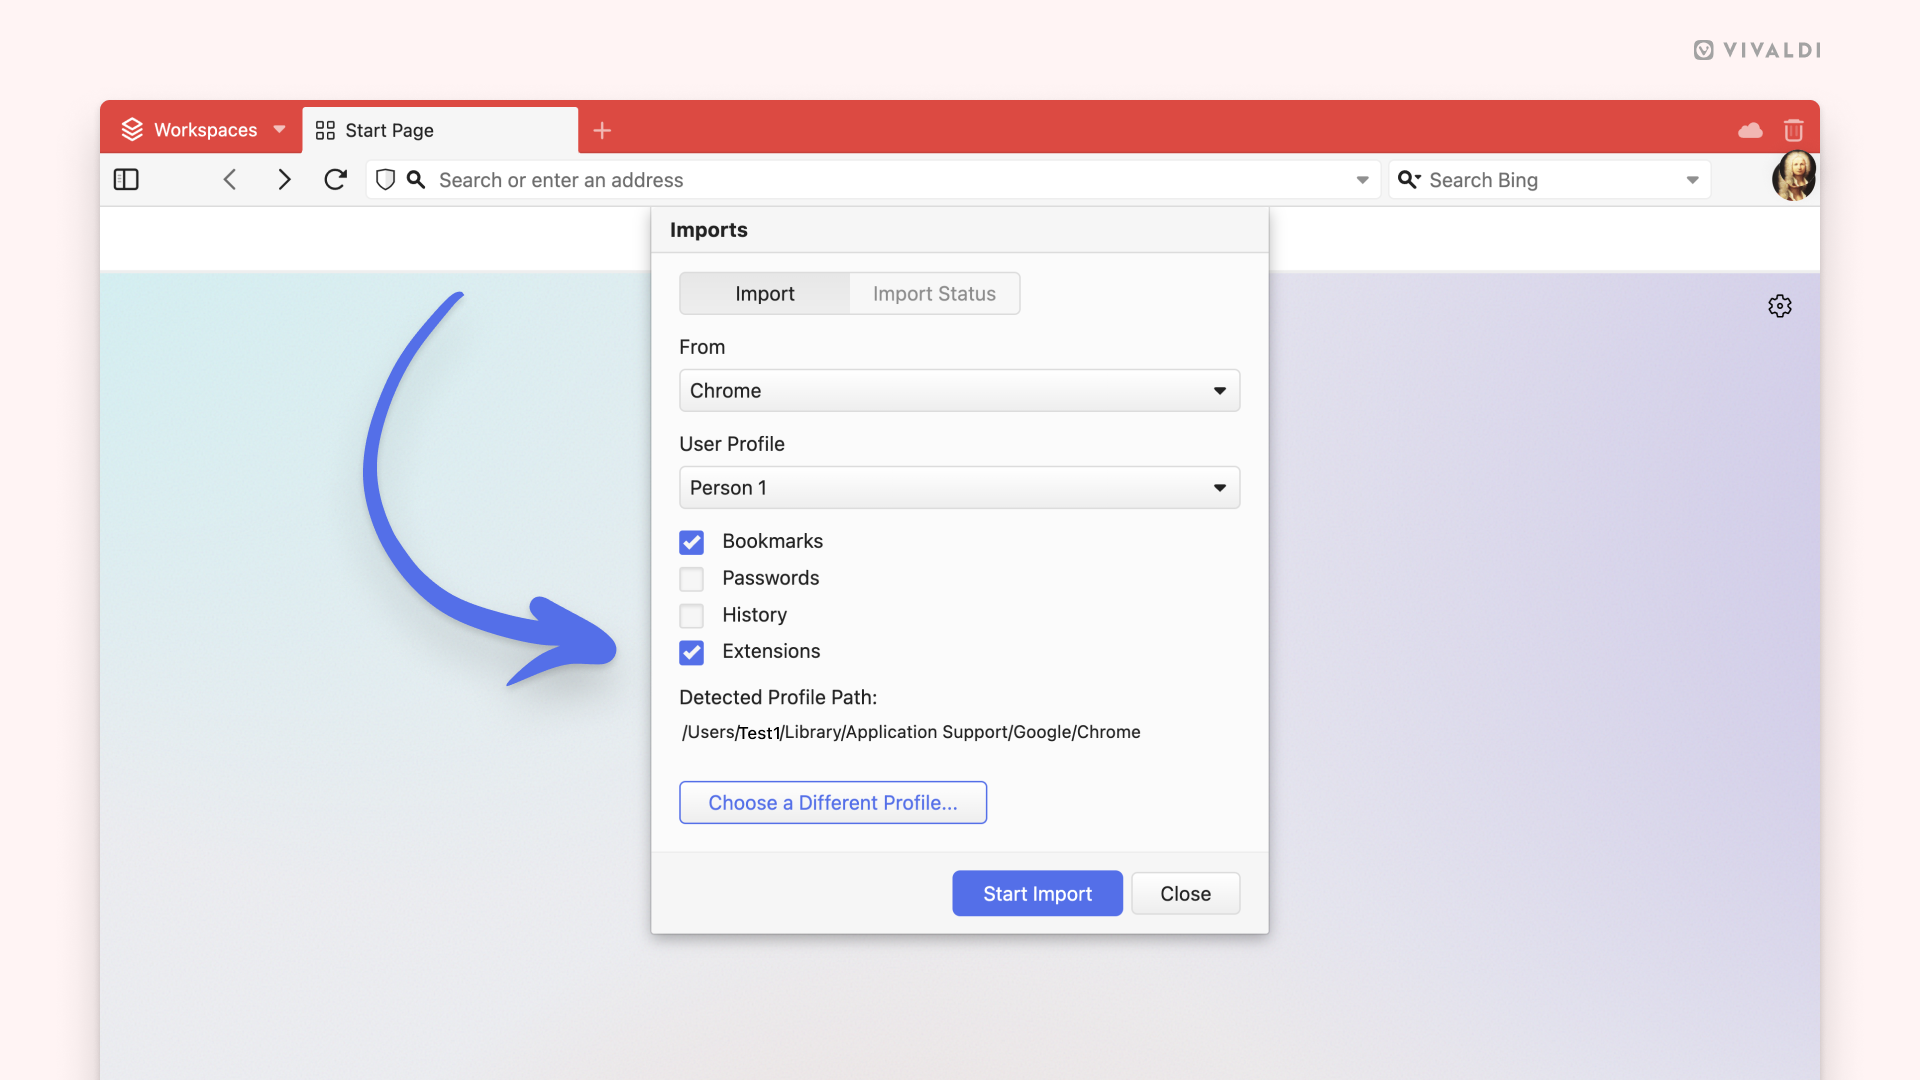 Import dialog with the option to import Extensions open in Vivaldi.